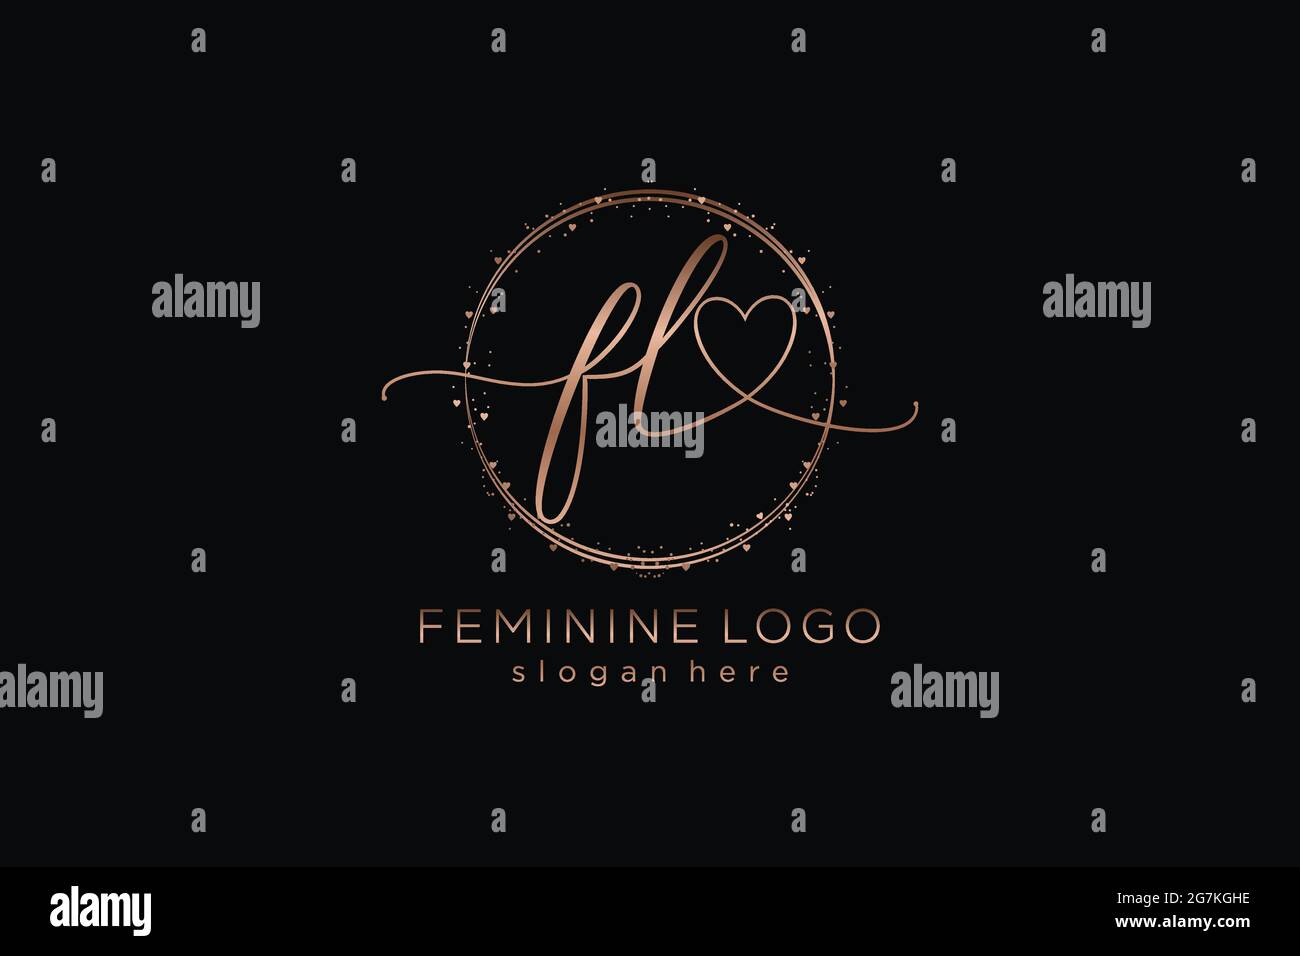 FL handwriting logo with circle template vector logo of initial wedding, fashion, floral and botanical with creative template. Stock Vector